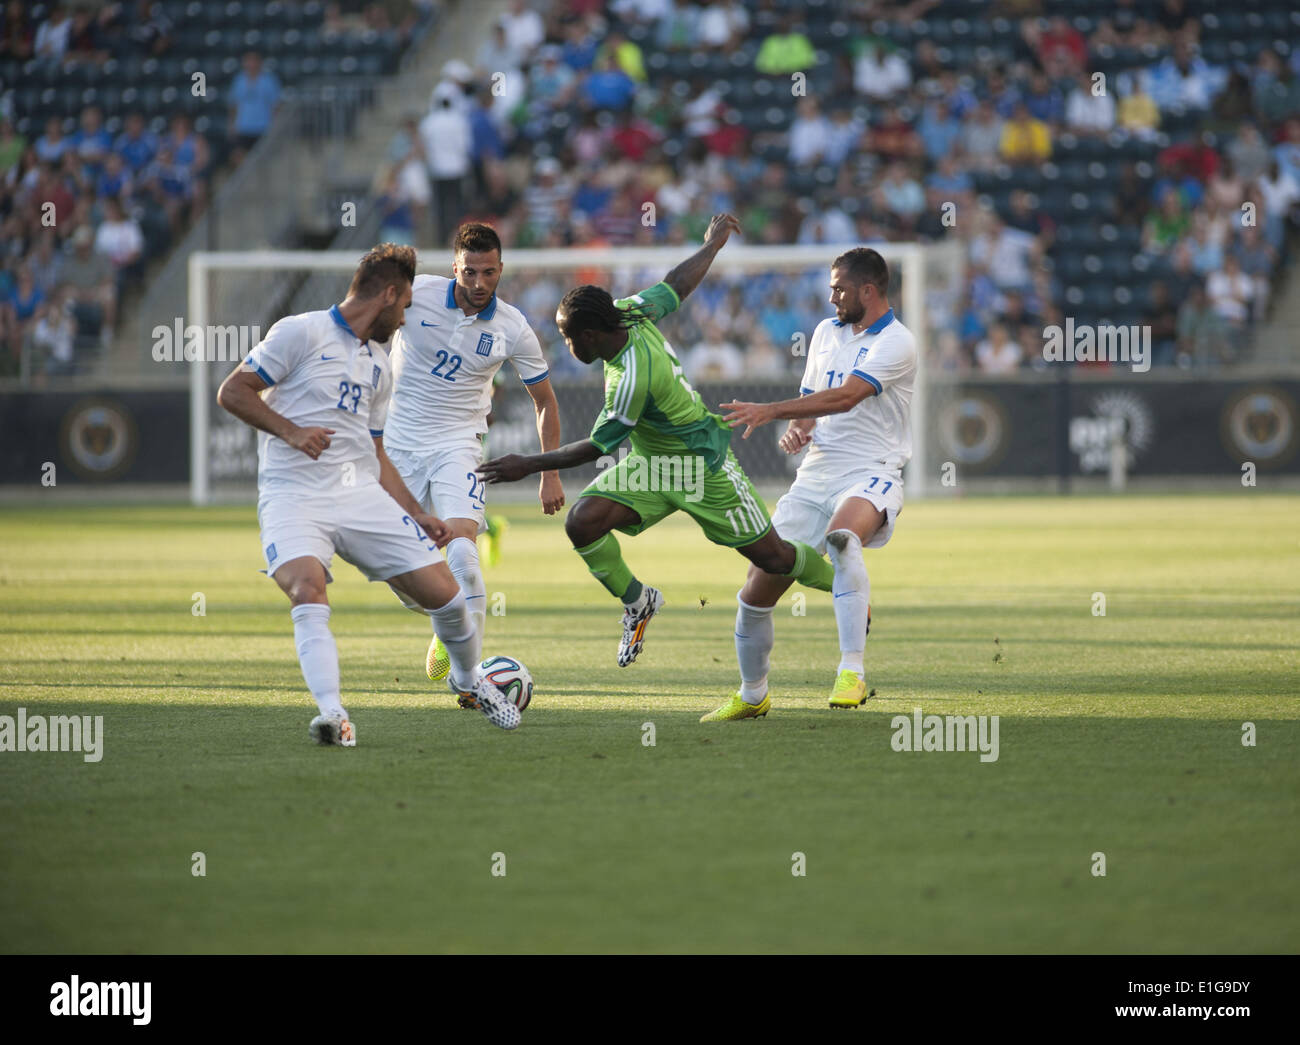 Chester, Pennsylvania, USA. 3rd June, 2014. VICTOR MOSES( 11) of Nigeria pushes the ball towards goal against ANDREA SAMARIS (22) and PANAGIOTIS TACHTSIDIS (23) of Greece. The international friendly match was held at PPL Park in Chester Pa © Ricky Fitchett/ZUMAPRESS.com/Alamy Live News Stock Photo